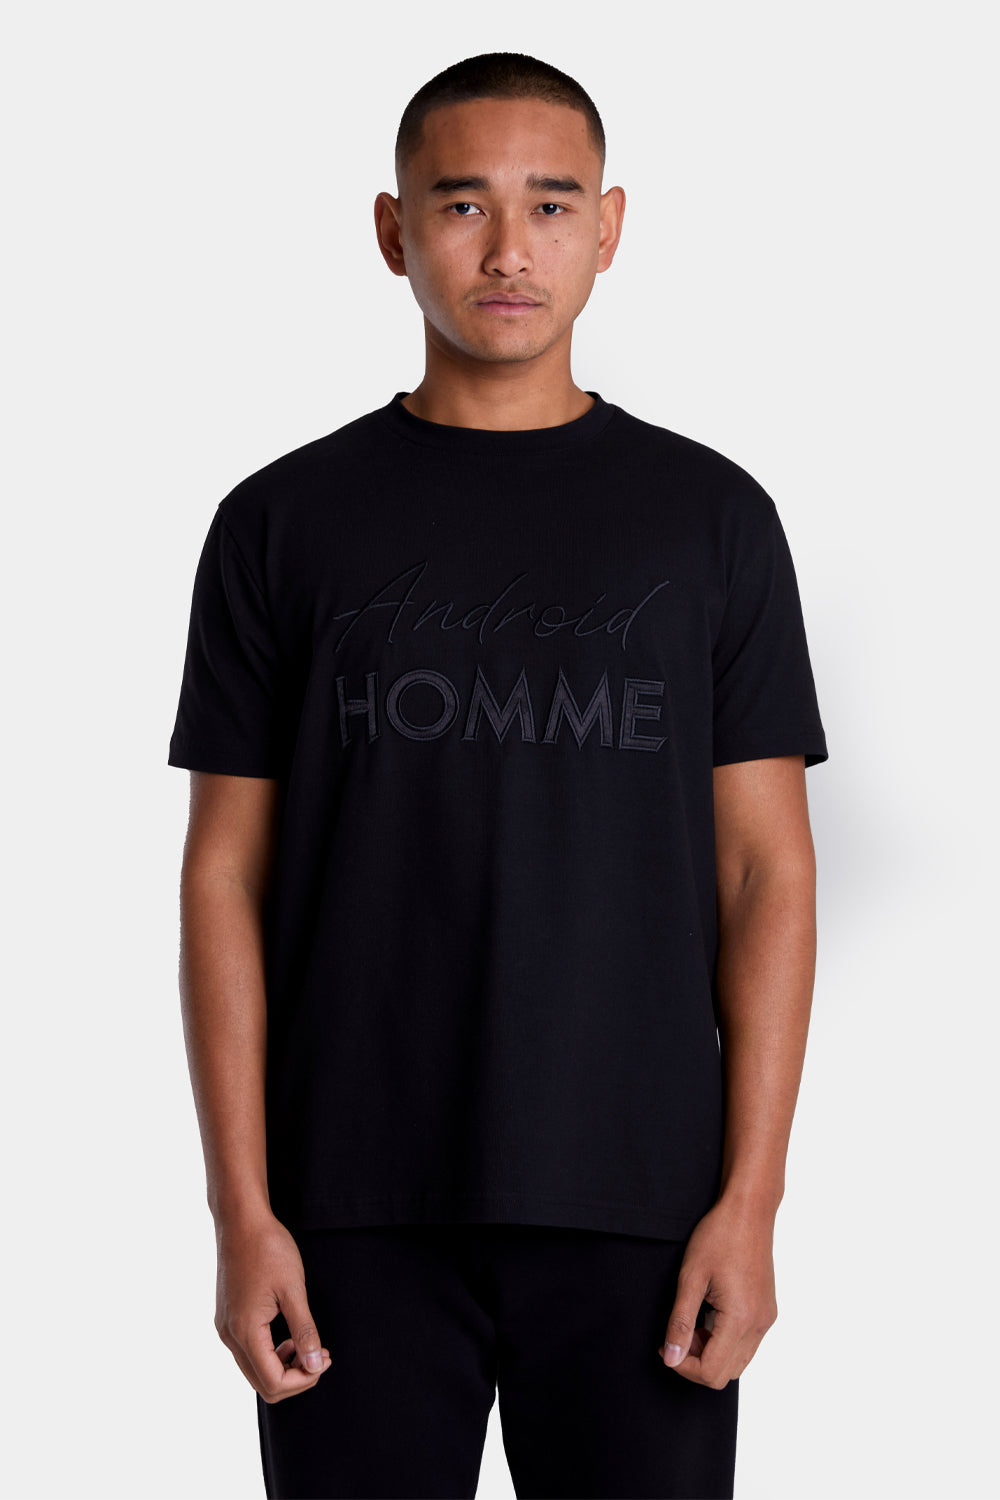 Buy the Android Homme Embroidered Android Homme T-shirt Black at Intro. Spend £50 for free UK delivery. Official stockists. We ship worldwide.